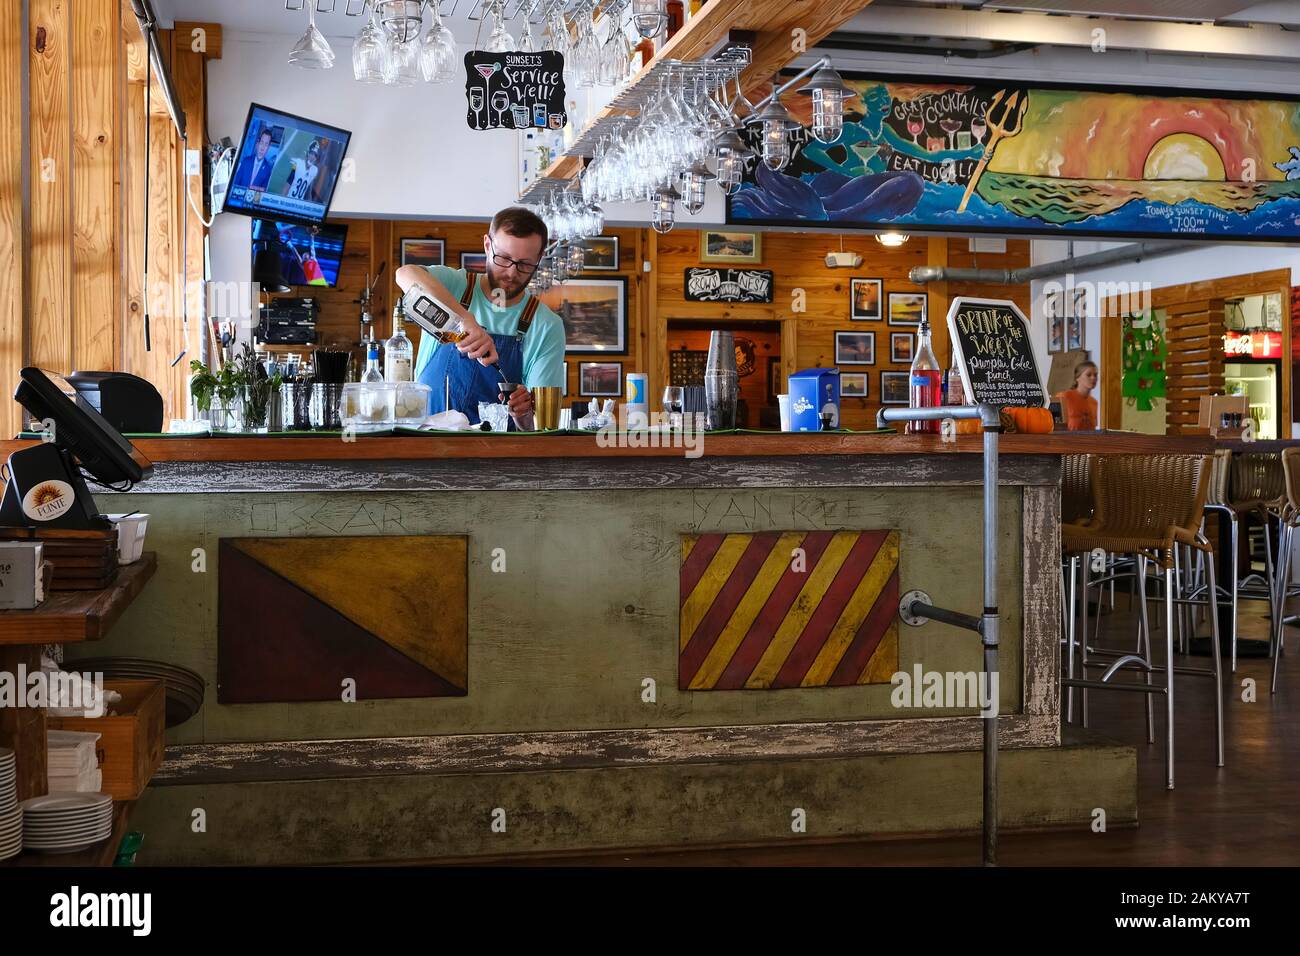 Bartender pouring a mixed alcoholic drink using Jack Daniel's bourbon whisky in restaurant / bar in Fairhope Alabama, United States. Stock Photo